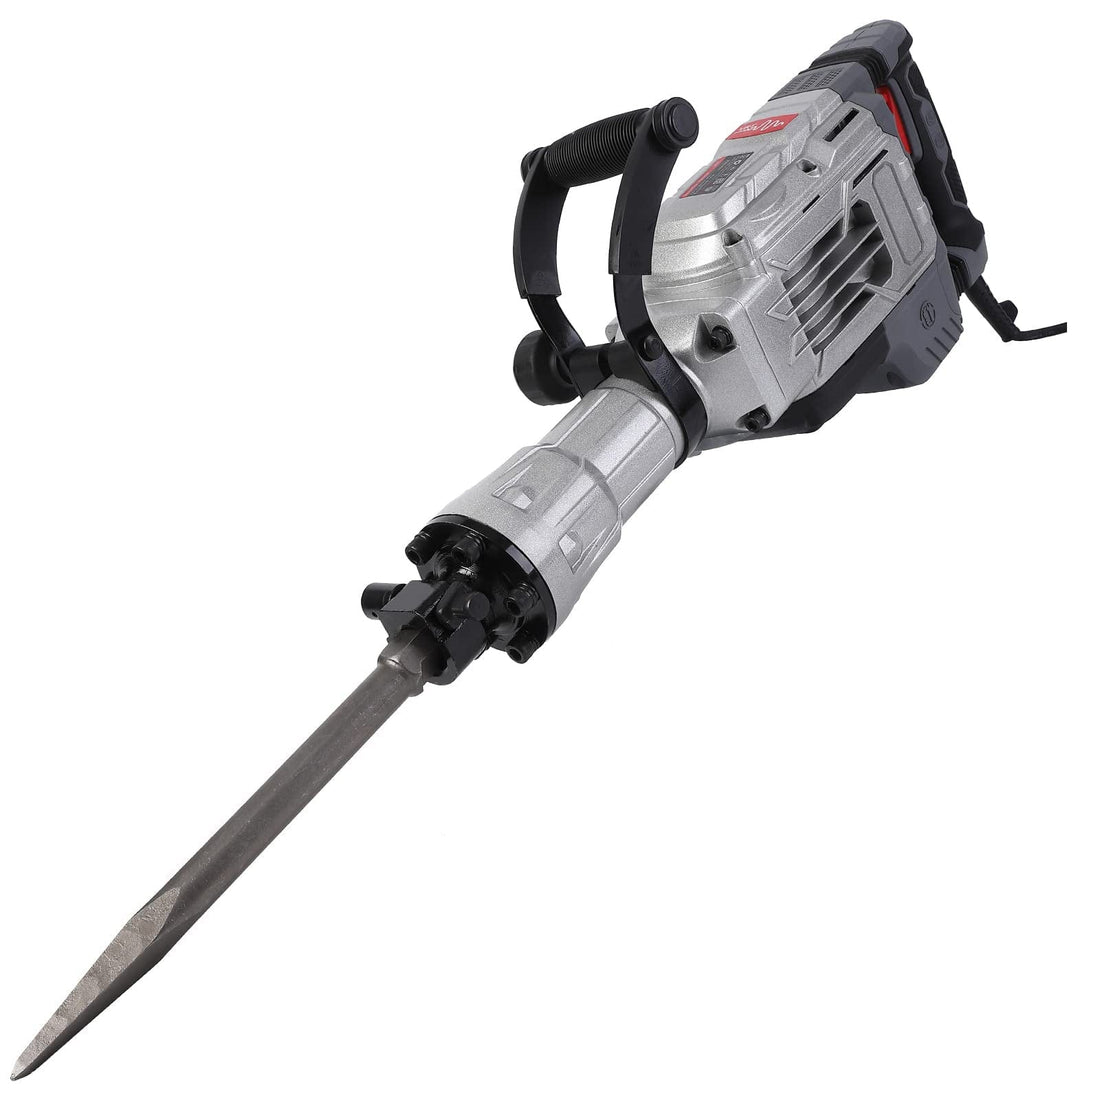 14 Amp SDS Hex Jack Hammer 1-1/8 Inch 2000W Concrete Chipping